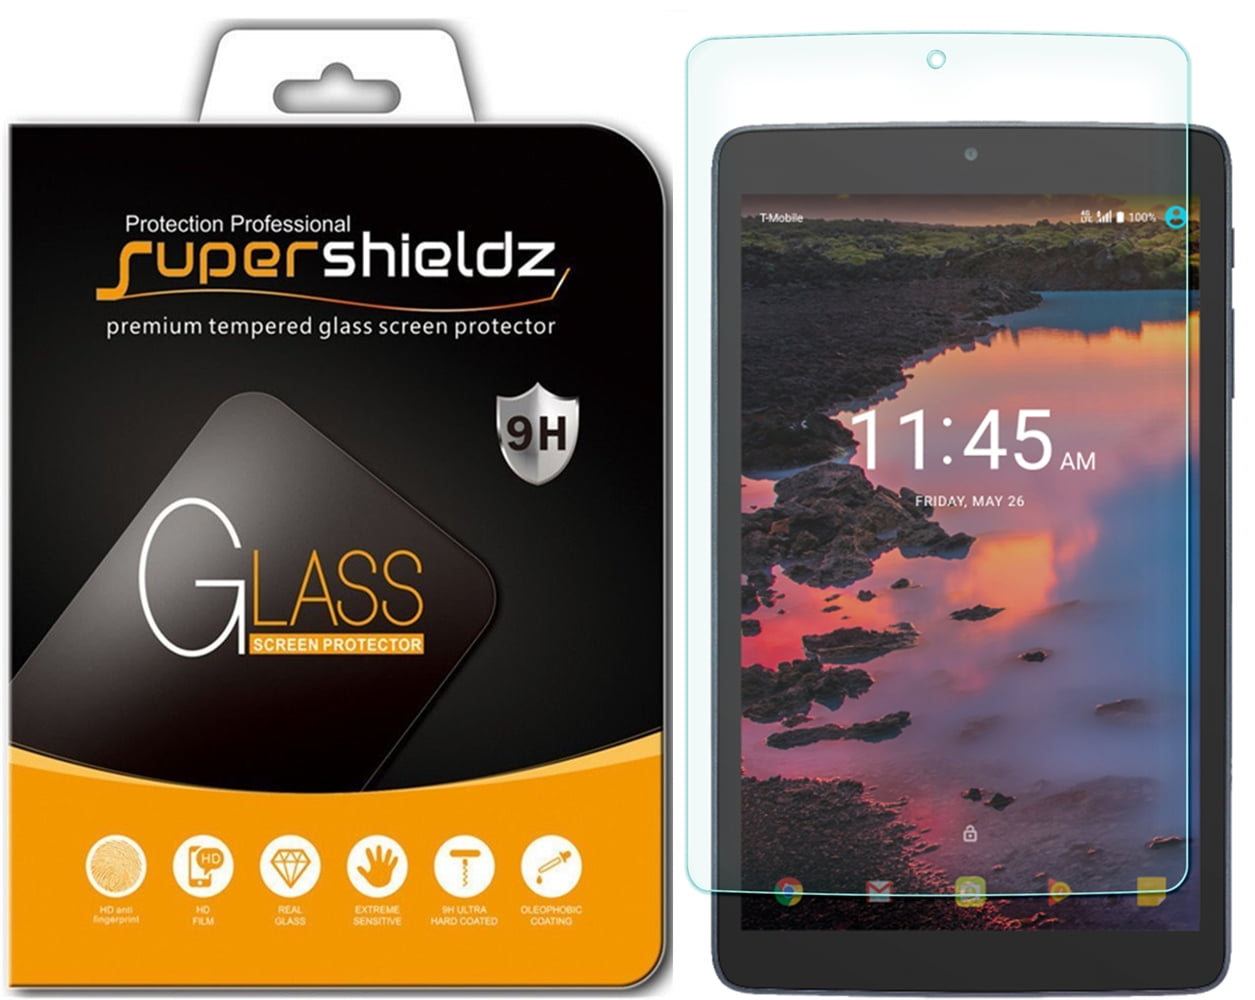 3X Dooqi HD Clear LCD Screen Protector Shield For Alcatel A30 Tablet 8-inch 